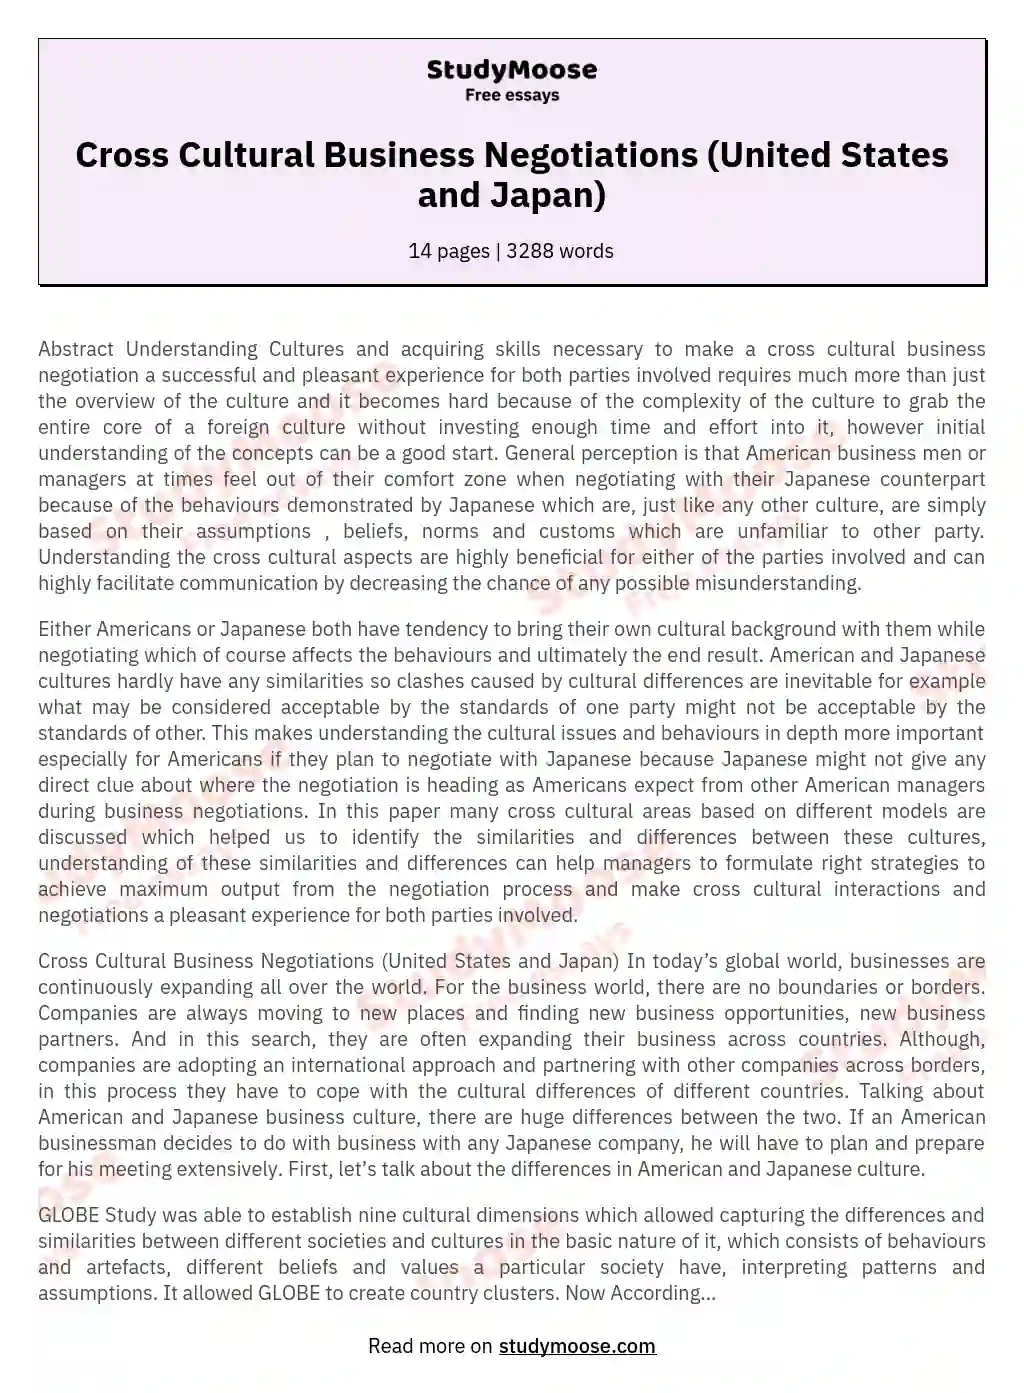 Cross Cultural Business Negotiations (United States and Japan)